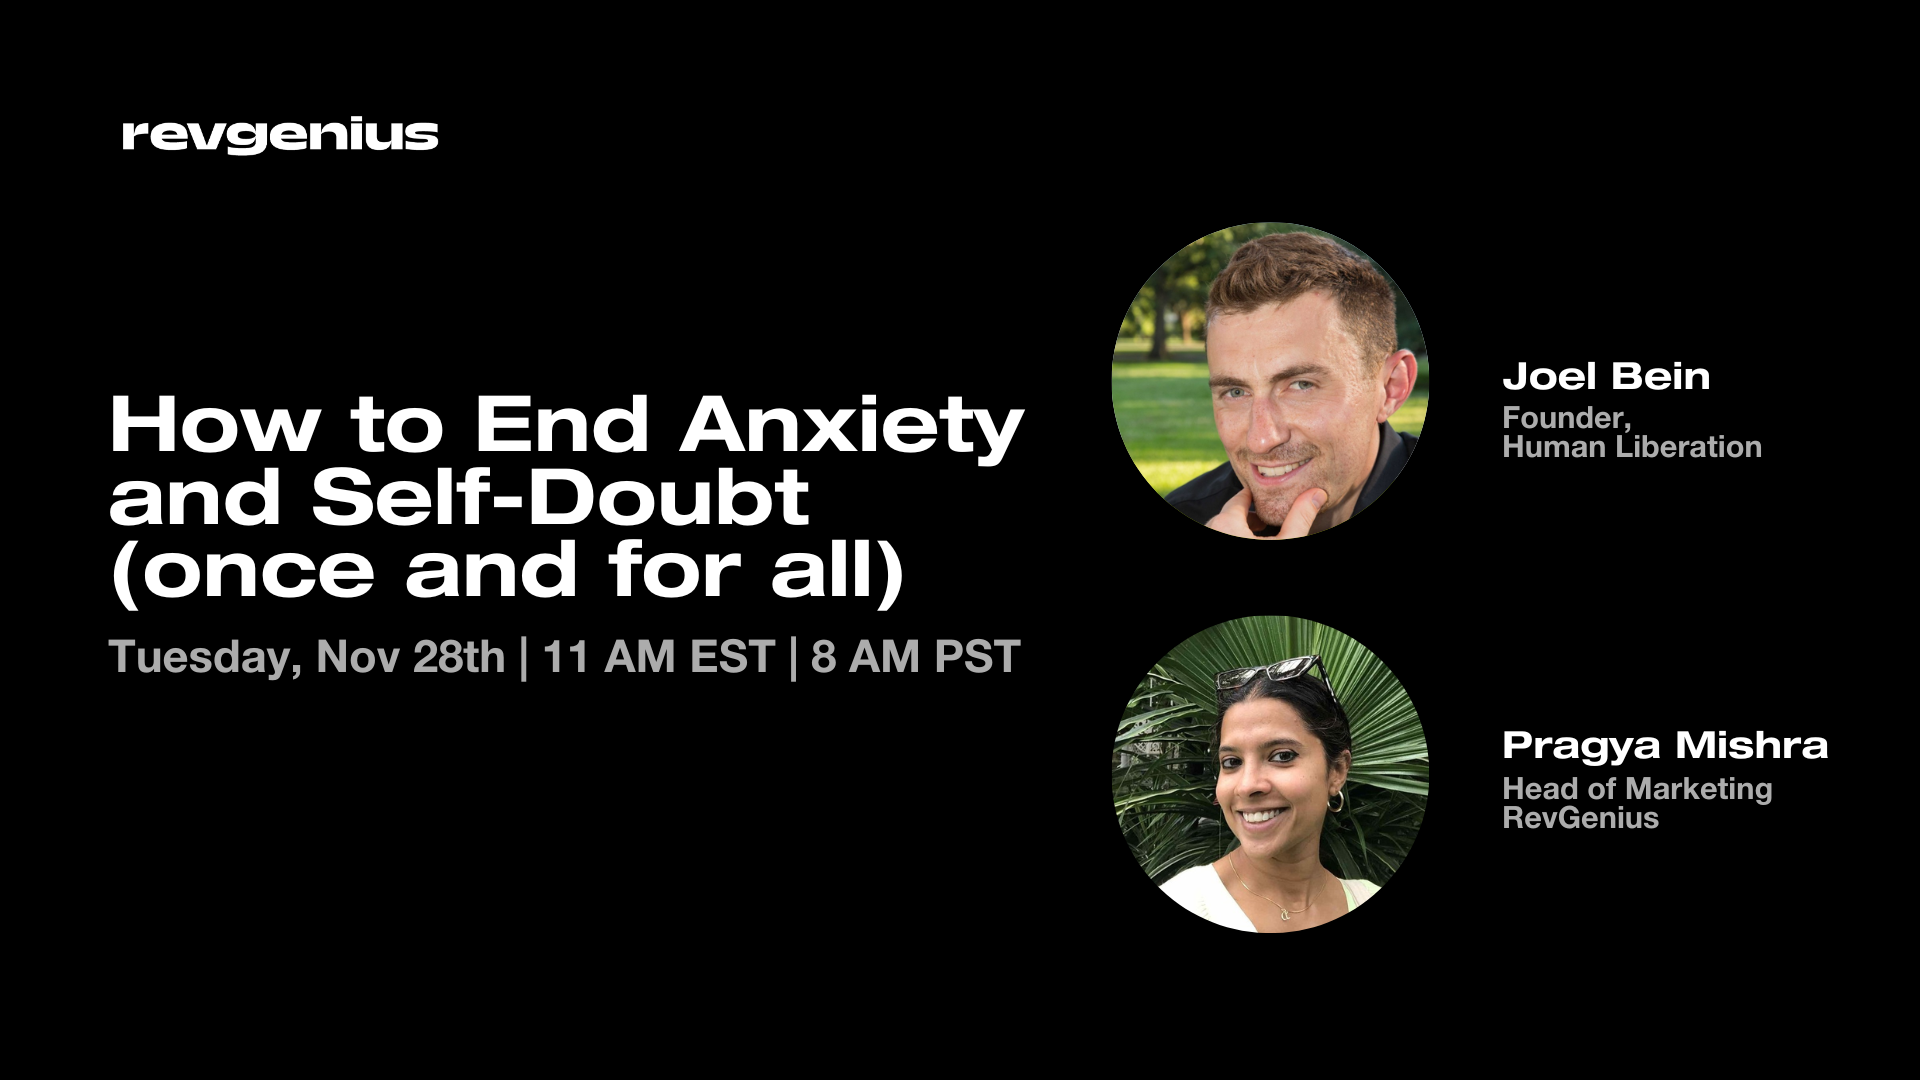 How to End Anxiety and Self-Doubt (once and for all)